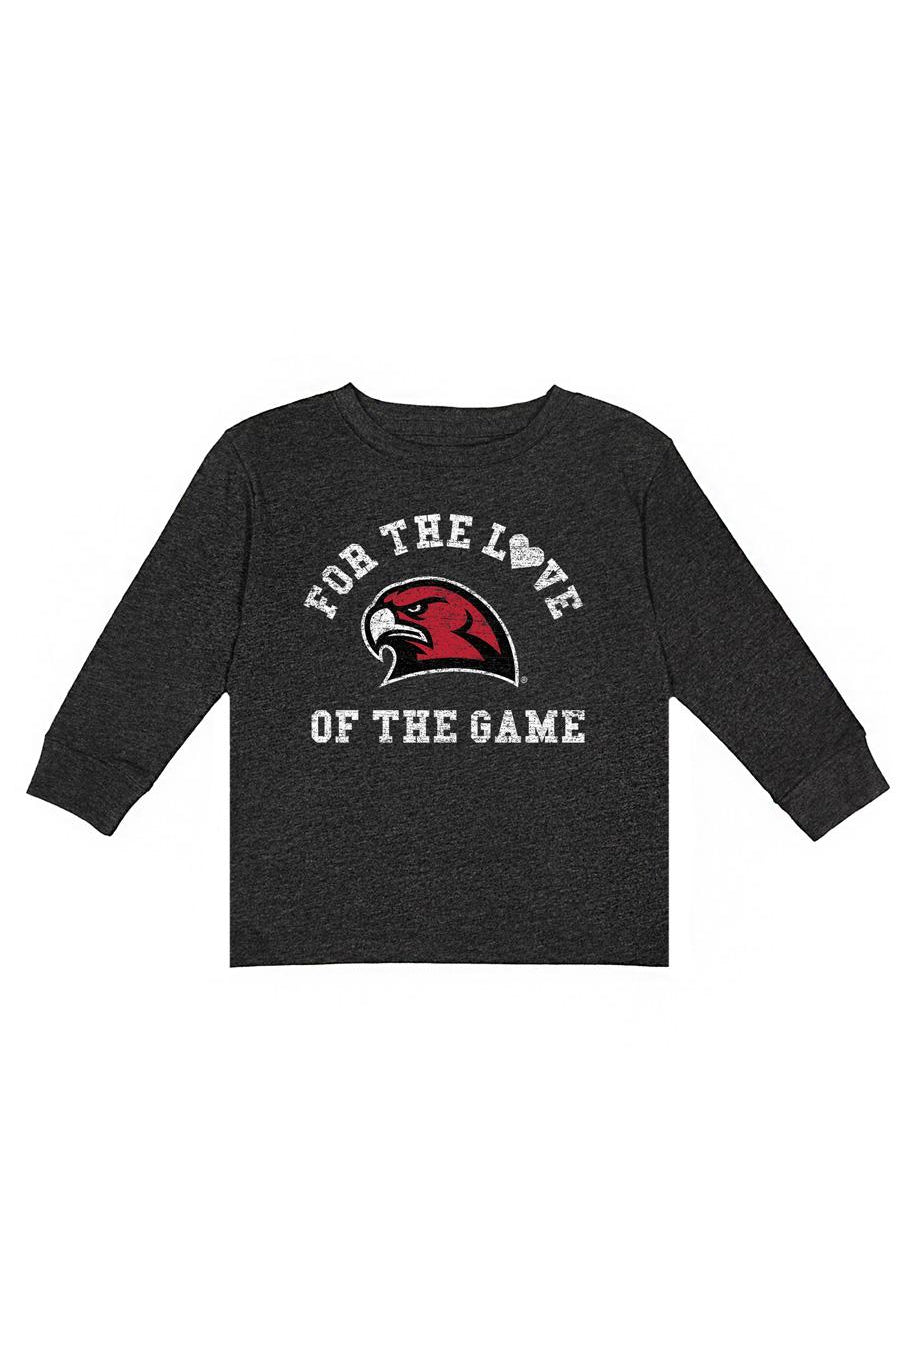 MIAMI OF OHIO REDHAWKS "FOR THE LOVE" CLASSIC GRAPHIC LONG SLEEVE CREW TODDLER TEE